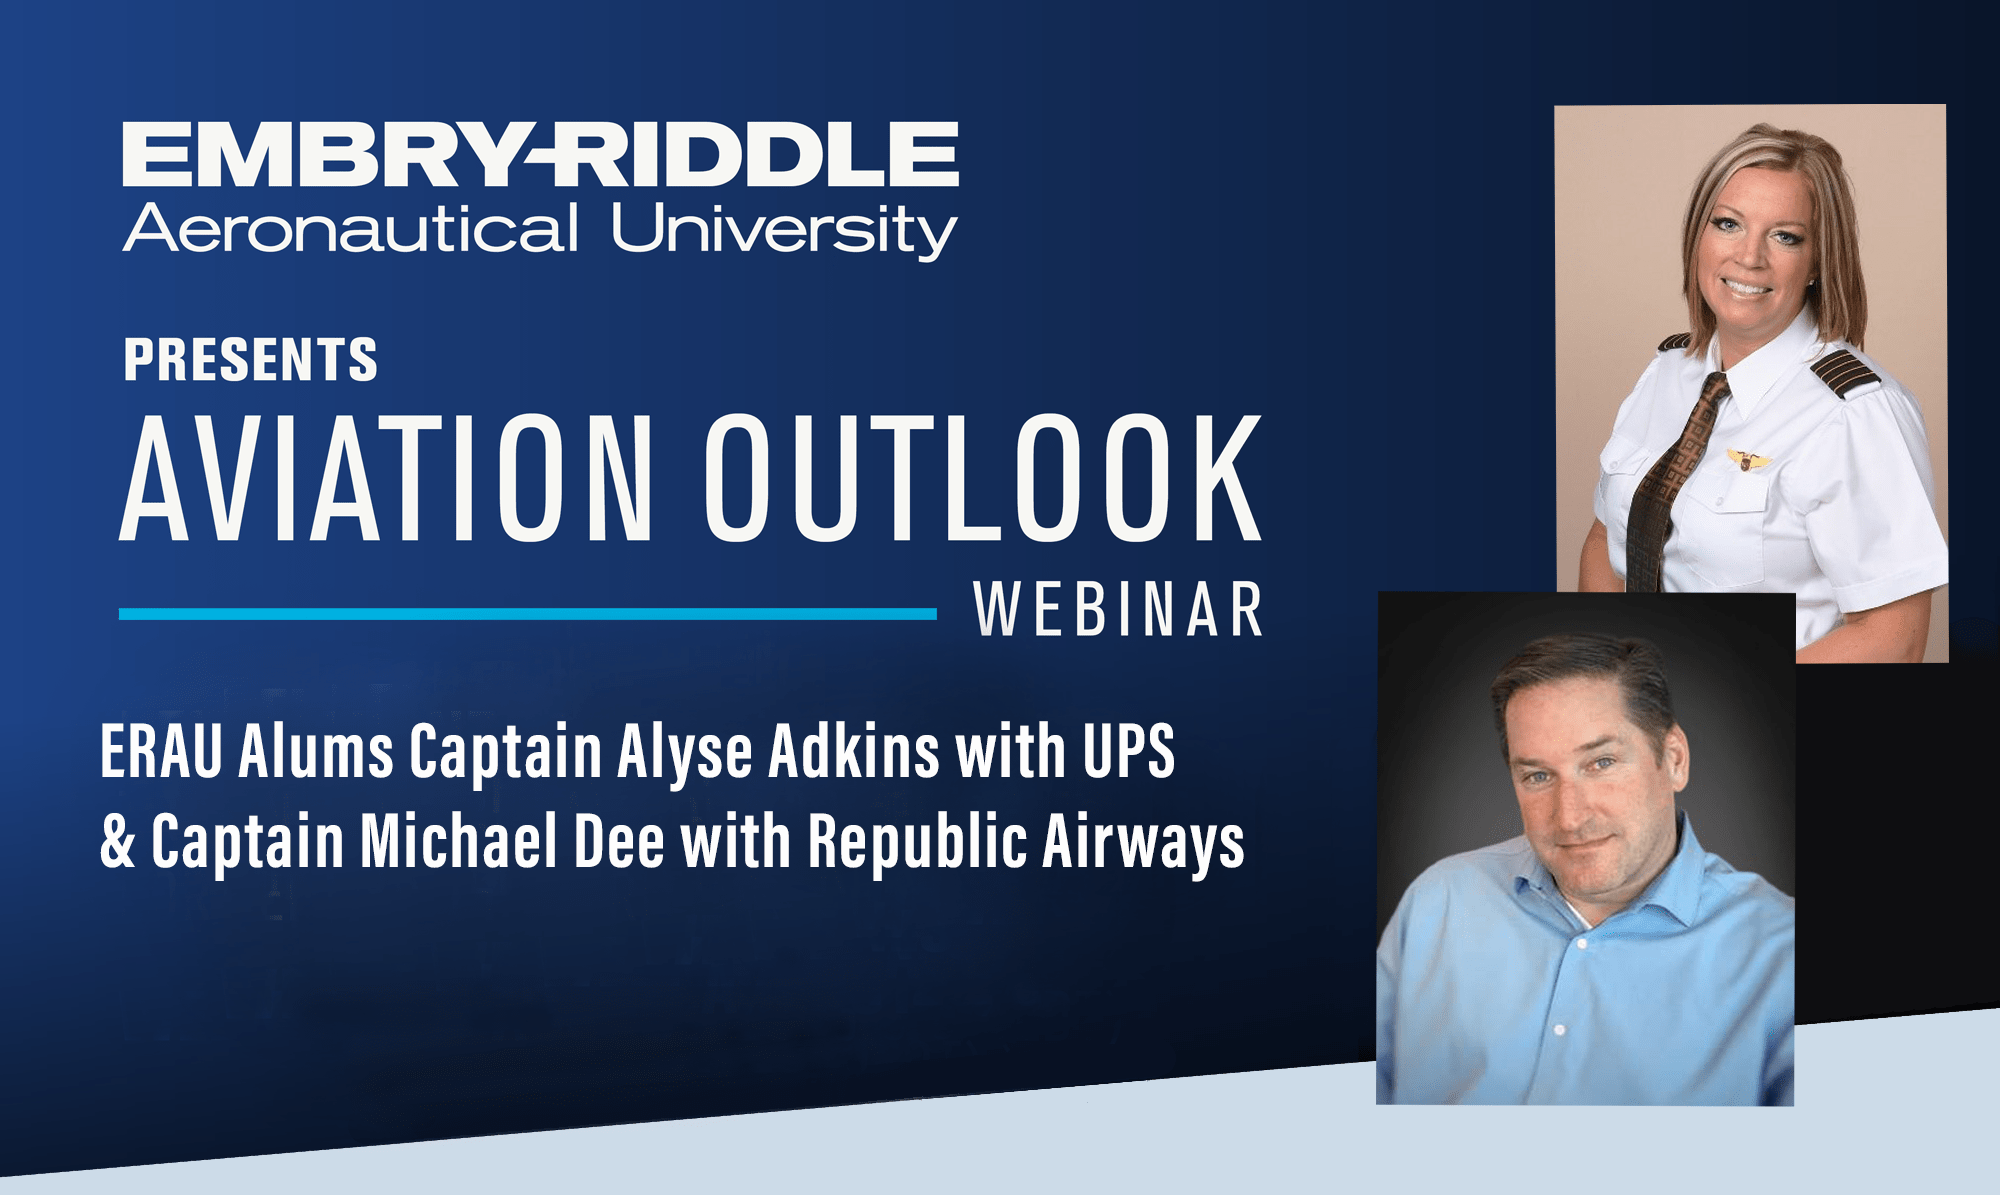 ERAU Alumns Captain Alyse Adkins with UPS & Captain Michael Dee with Republic Airways will be part of the eighth session of Embry-Riddle’s free and interactive Aviation Outlook webinar series.